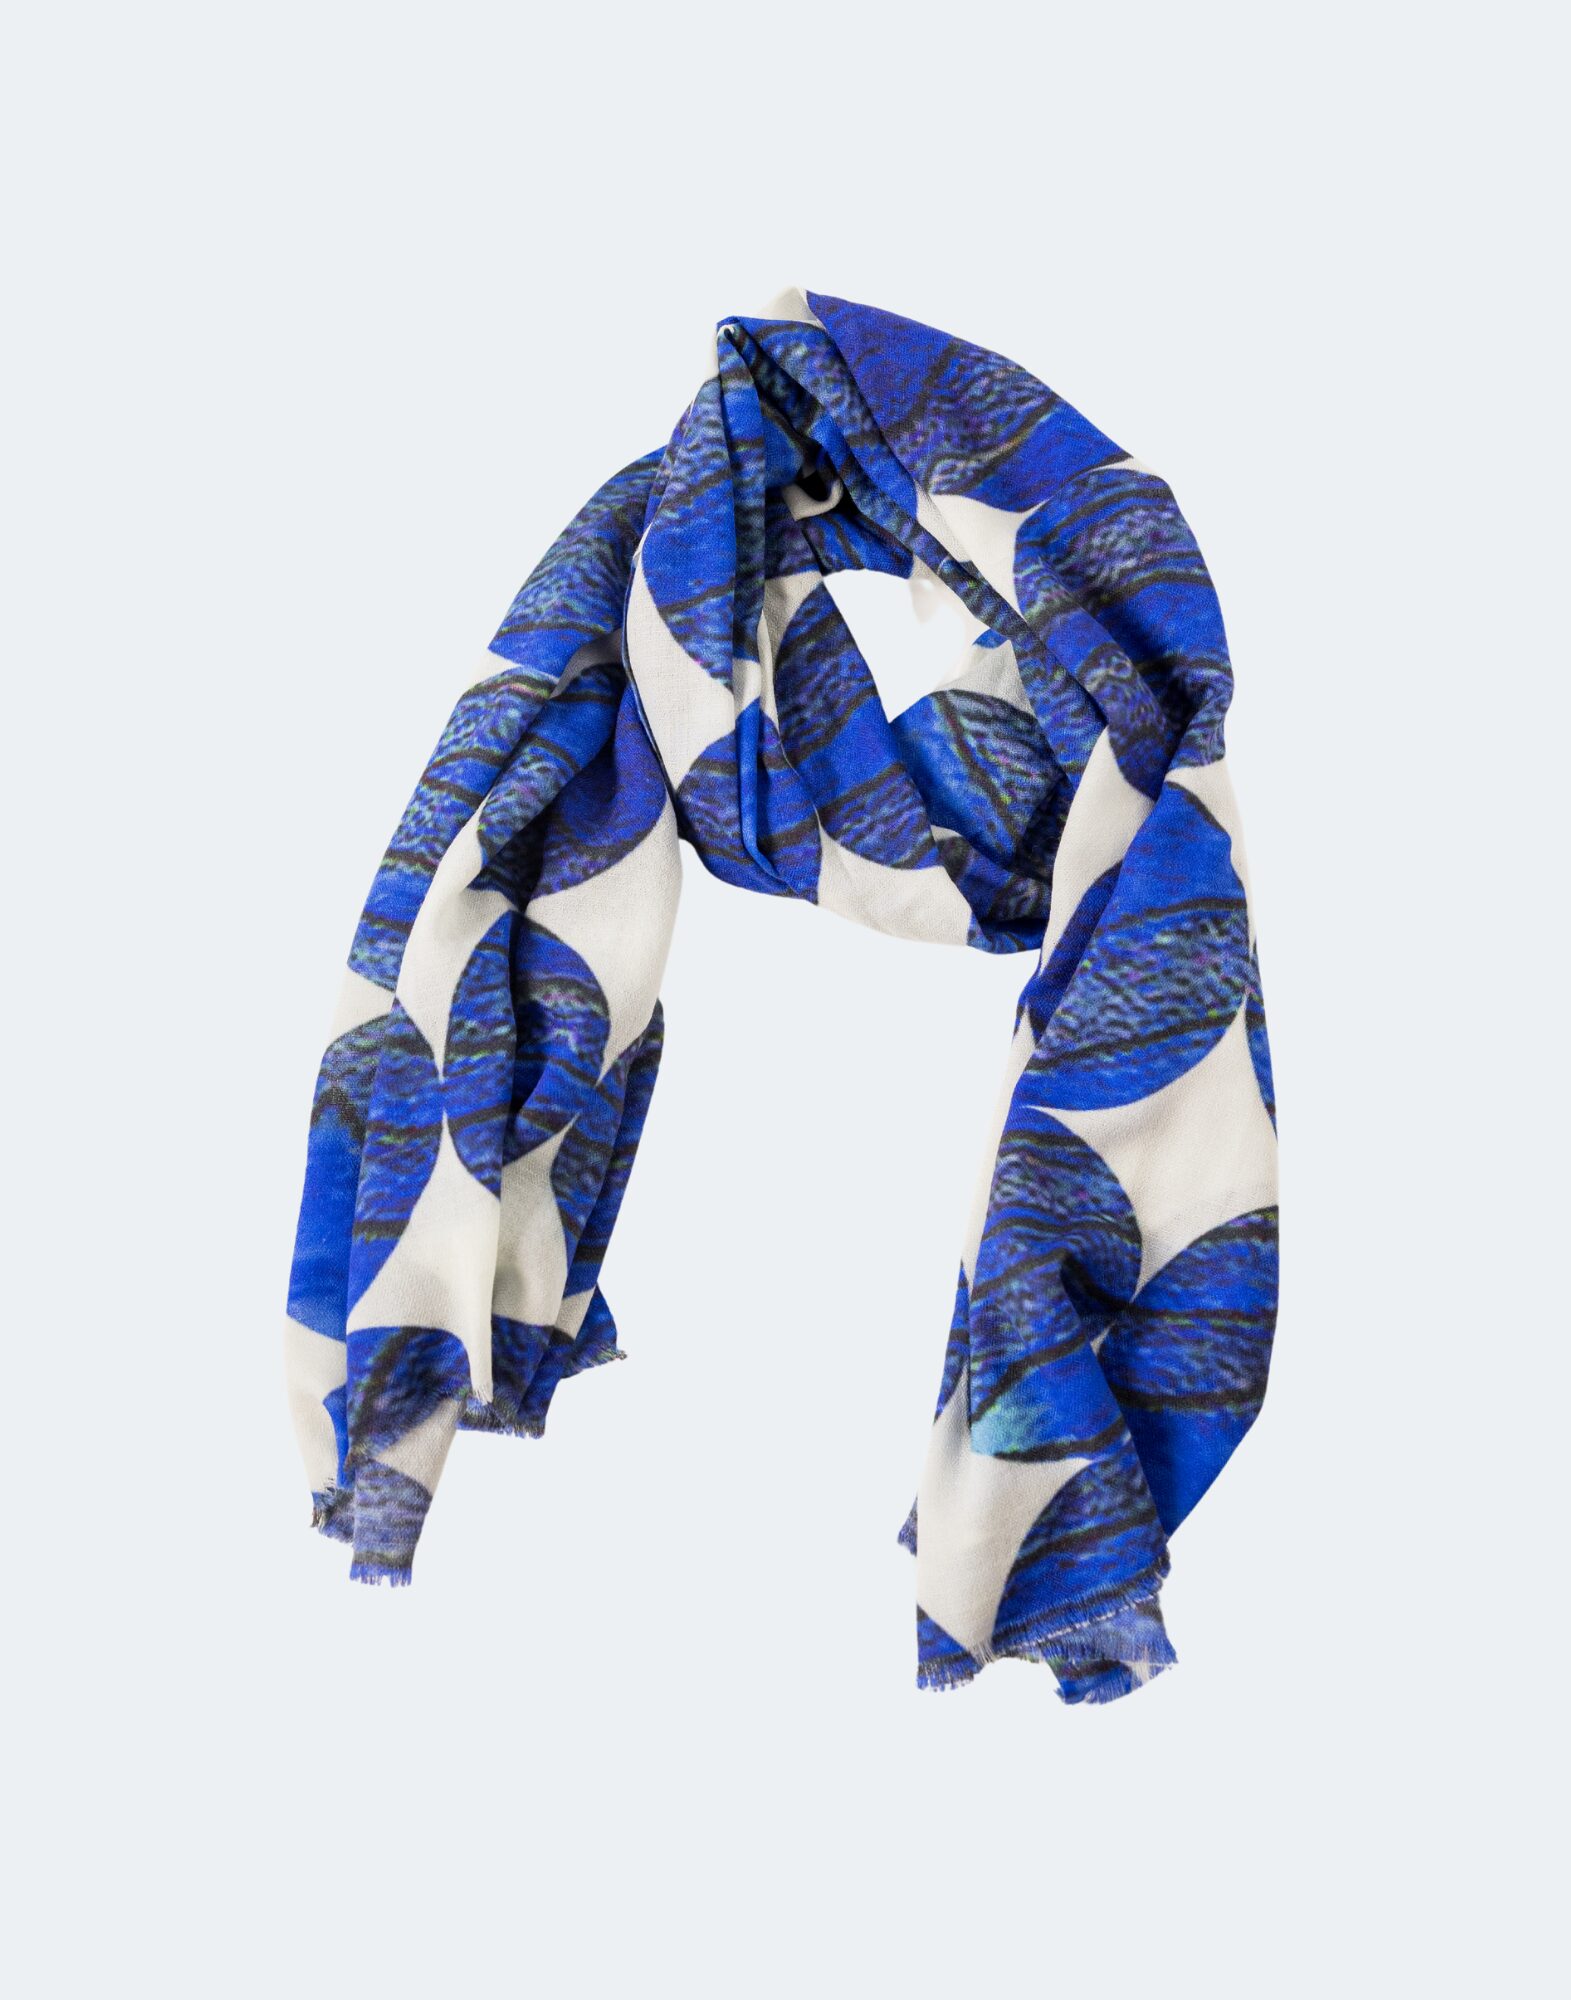 Scarf with blue print circles against a white background